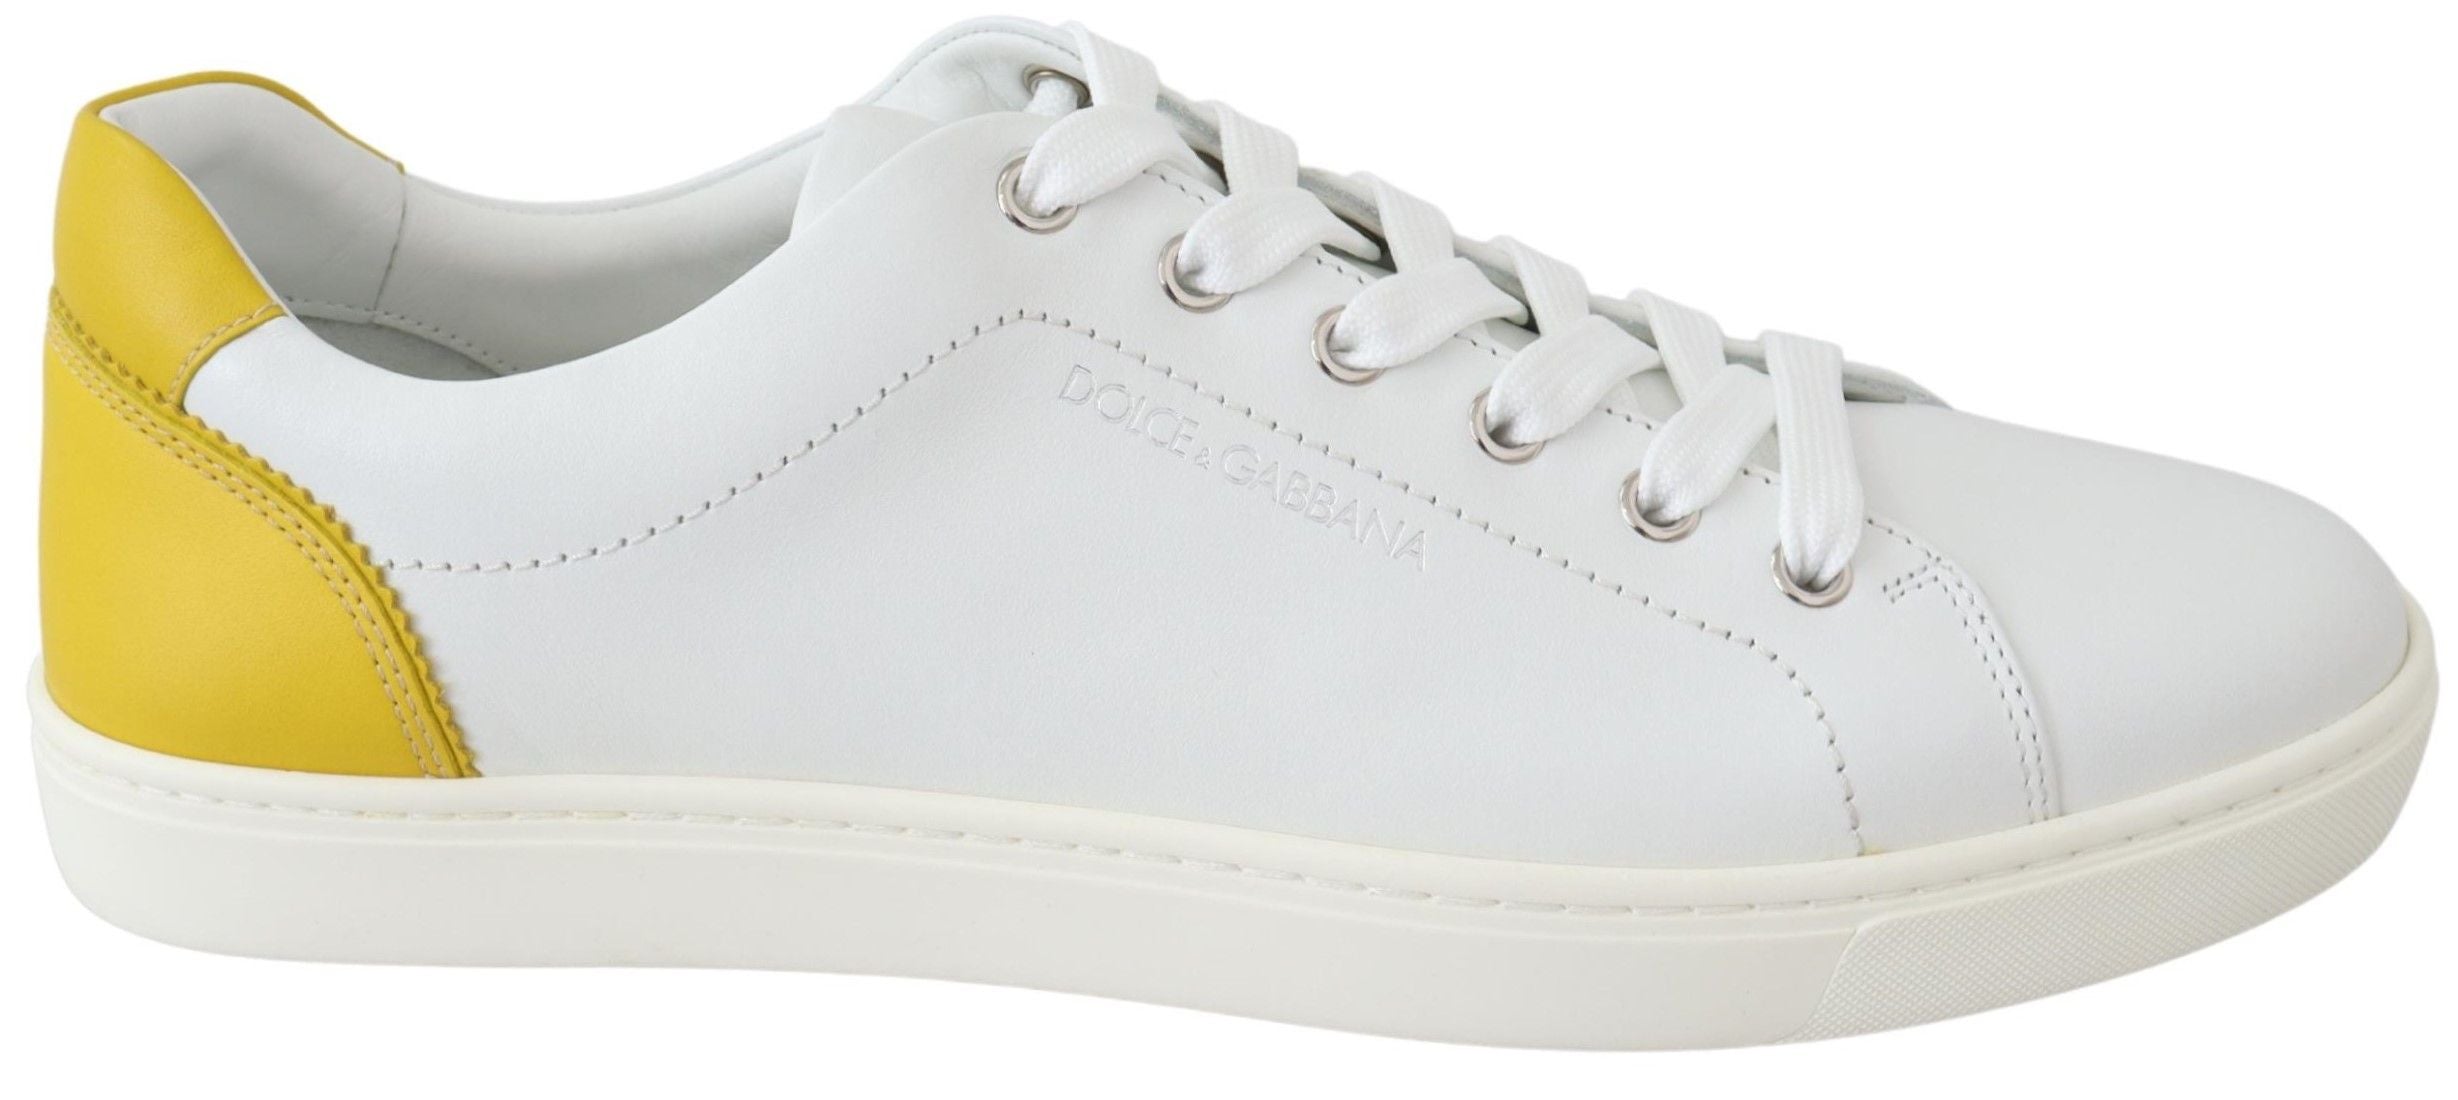 Dolce & Gabbana White Yellow Leather Low Top  Sneakers Shoes